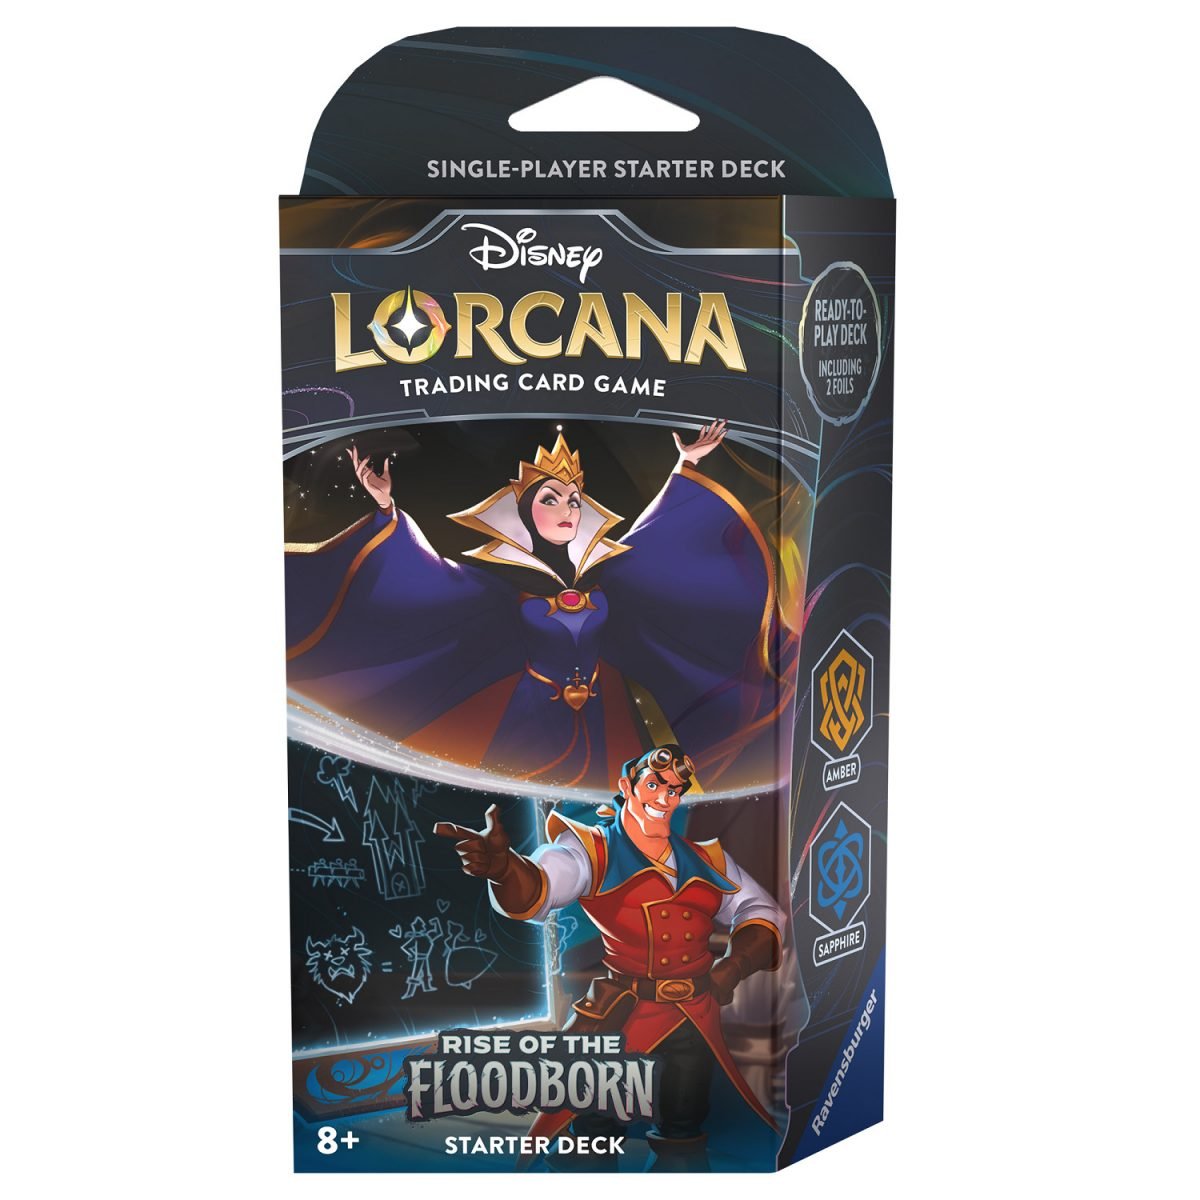 Merin and Tiana on the cover of the Disney Lorcana: Rise of the Floodborn Sapphire and Amber starter deck box